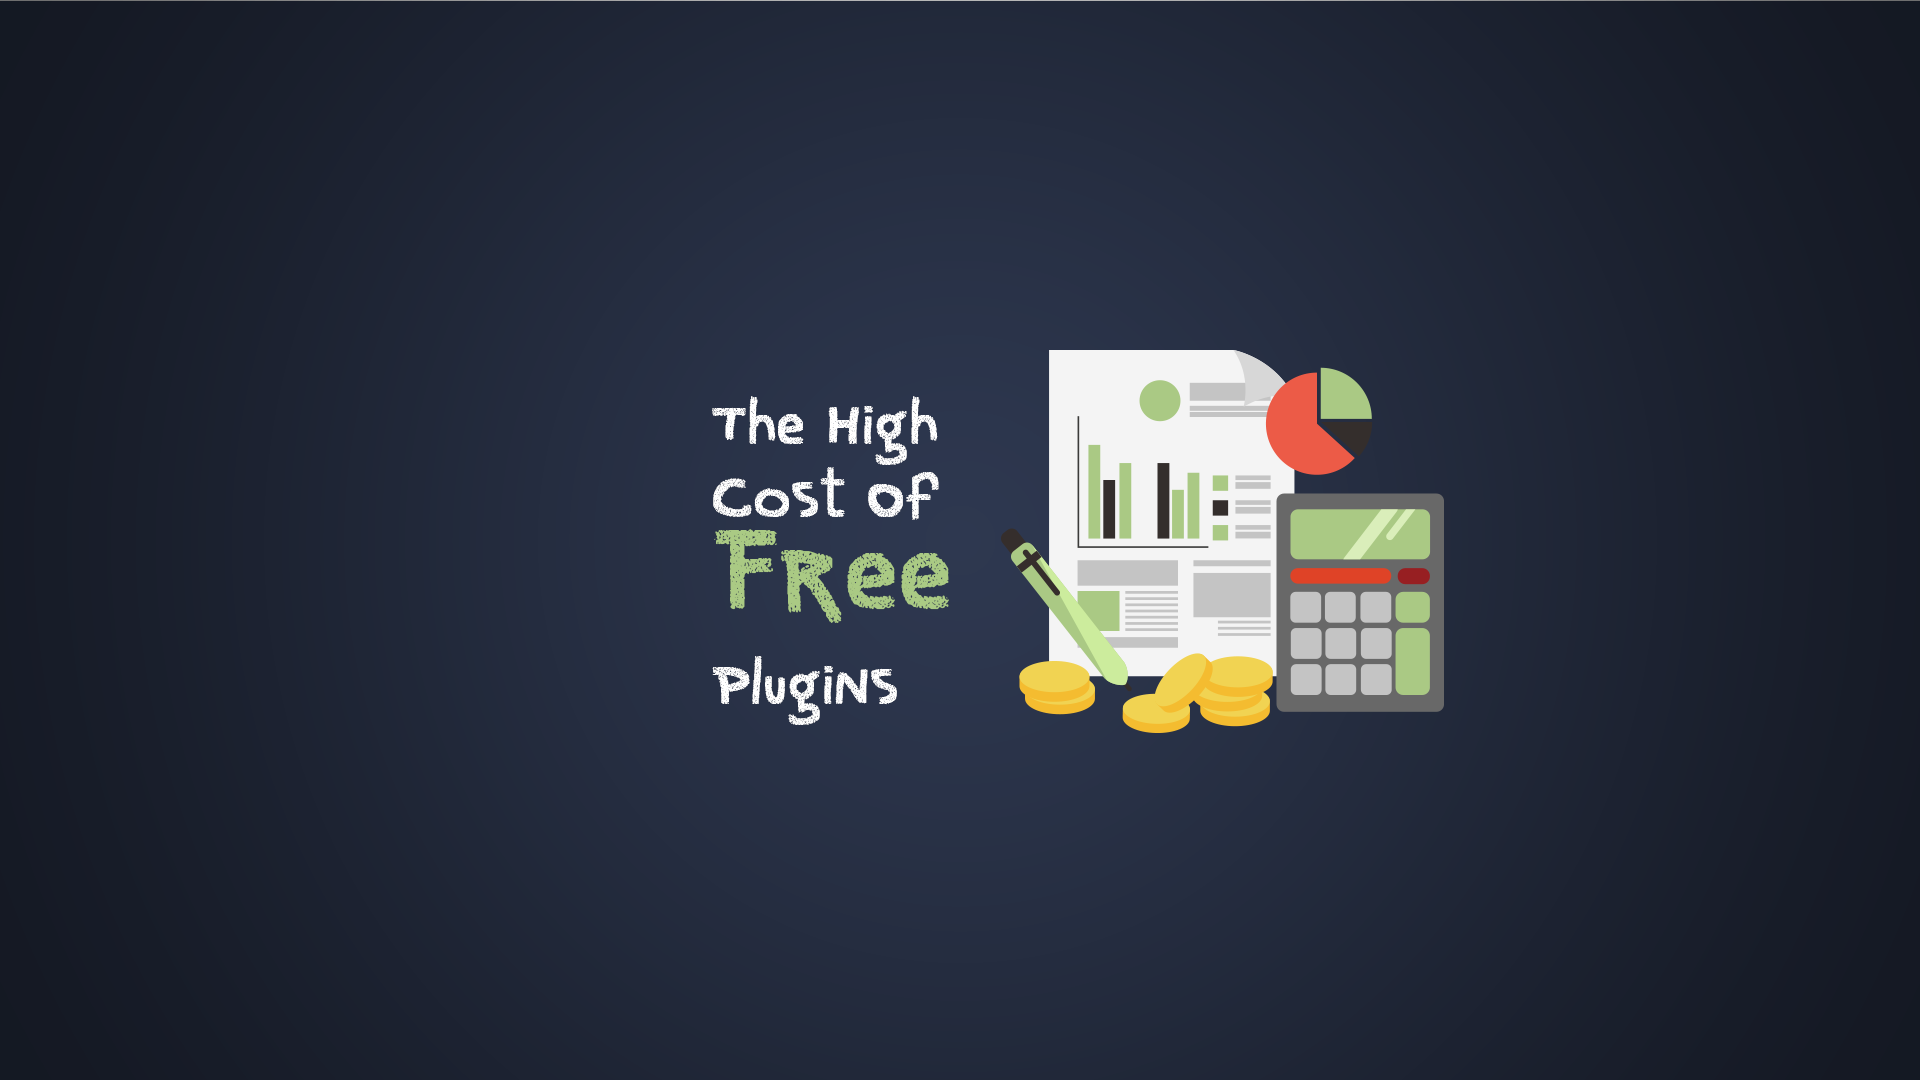 The High Cost of Free Plugins